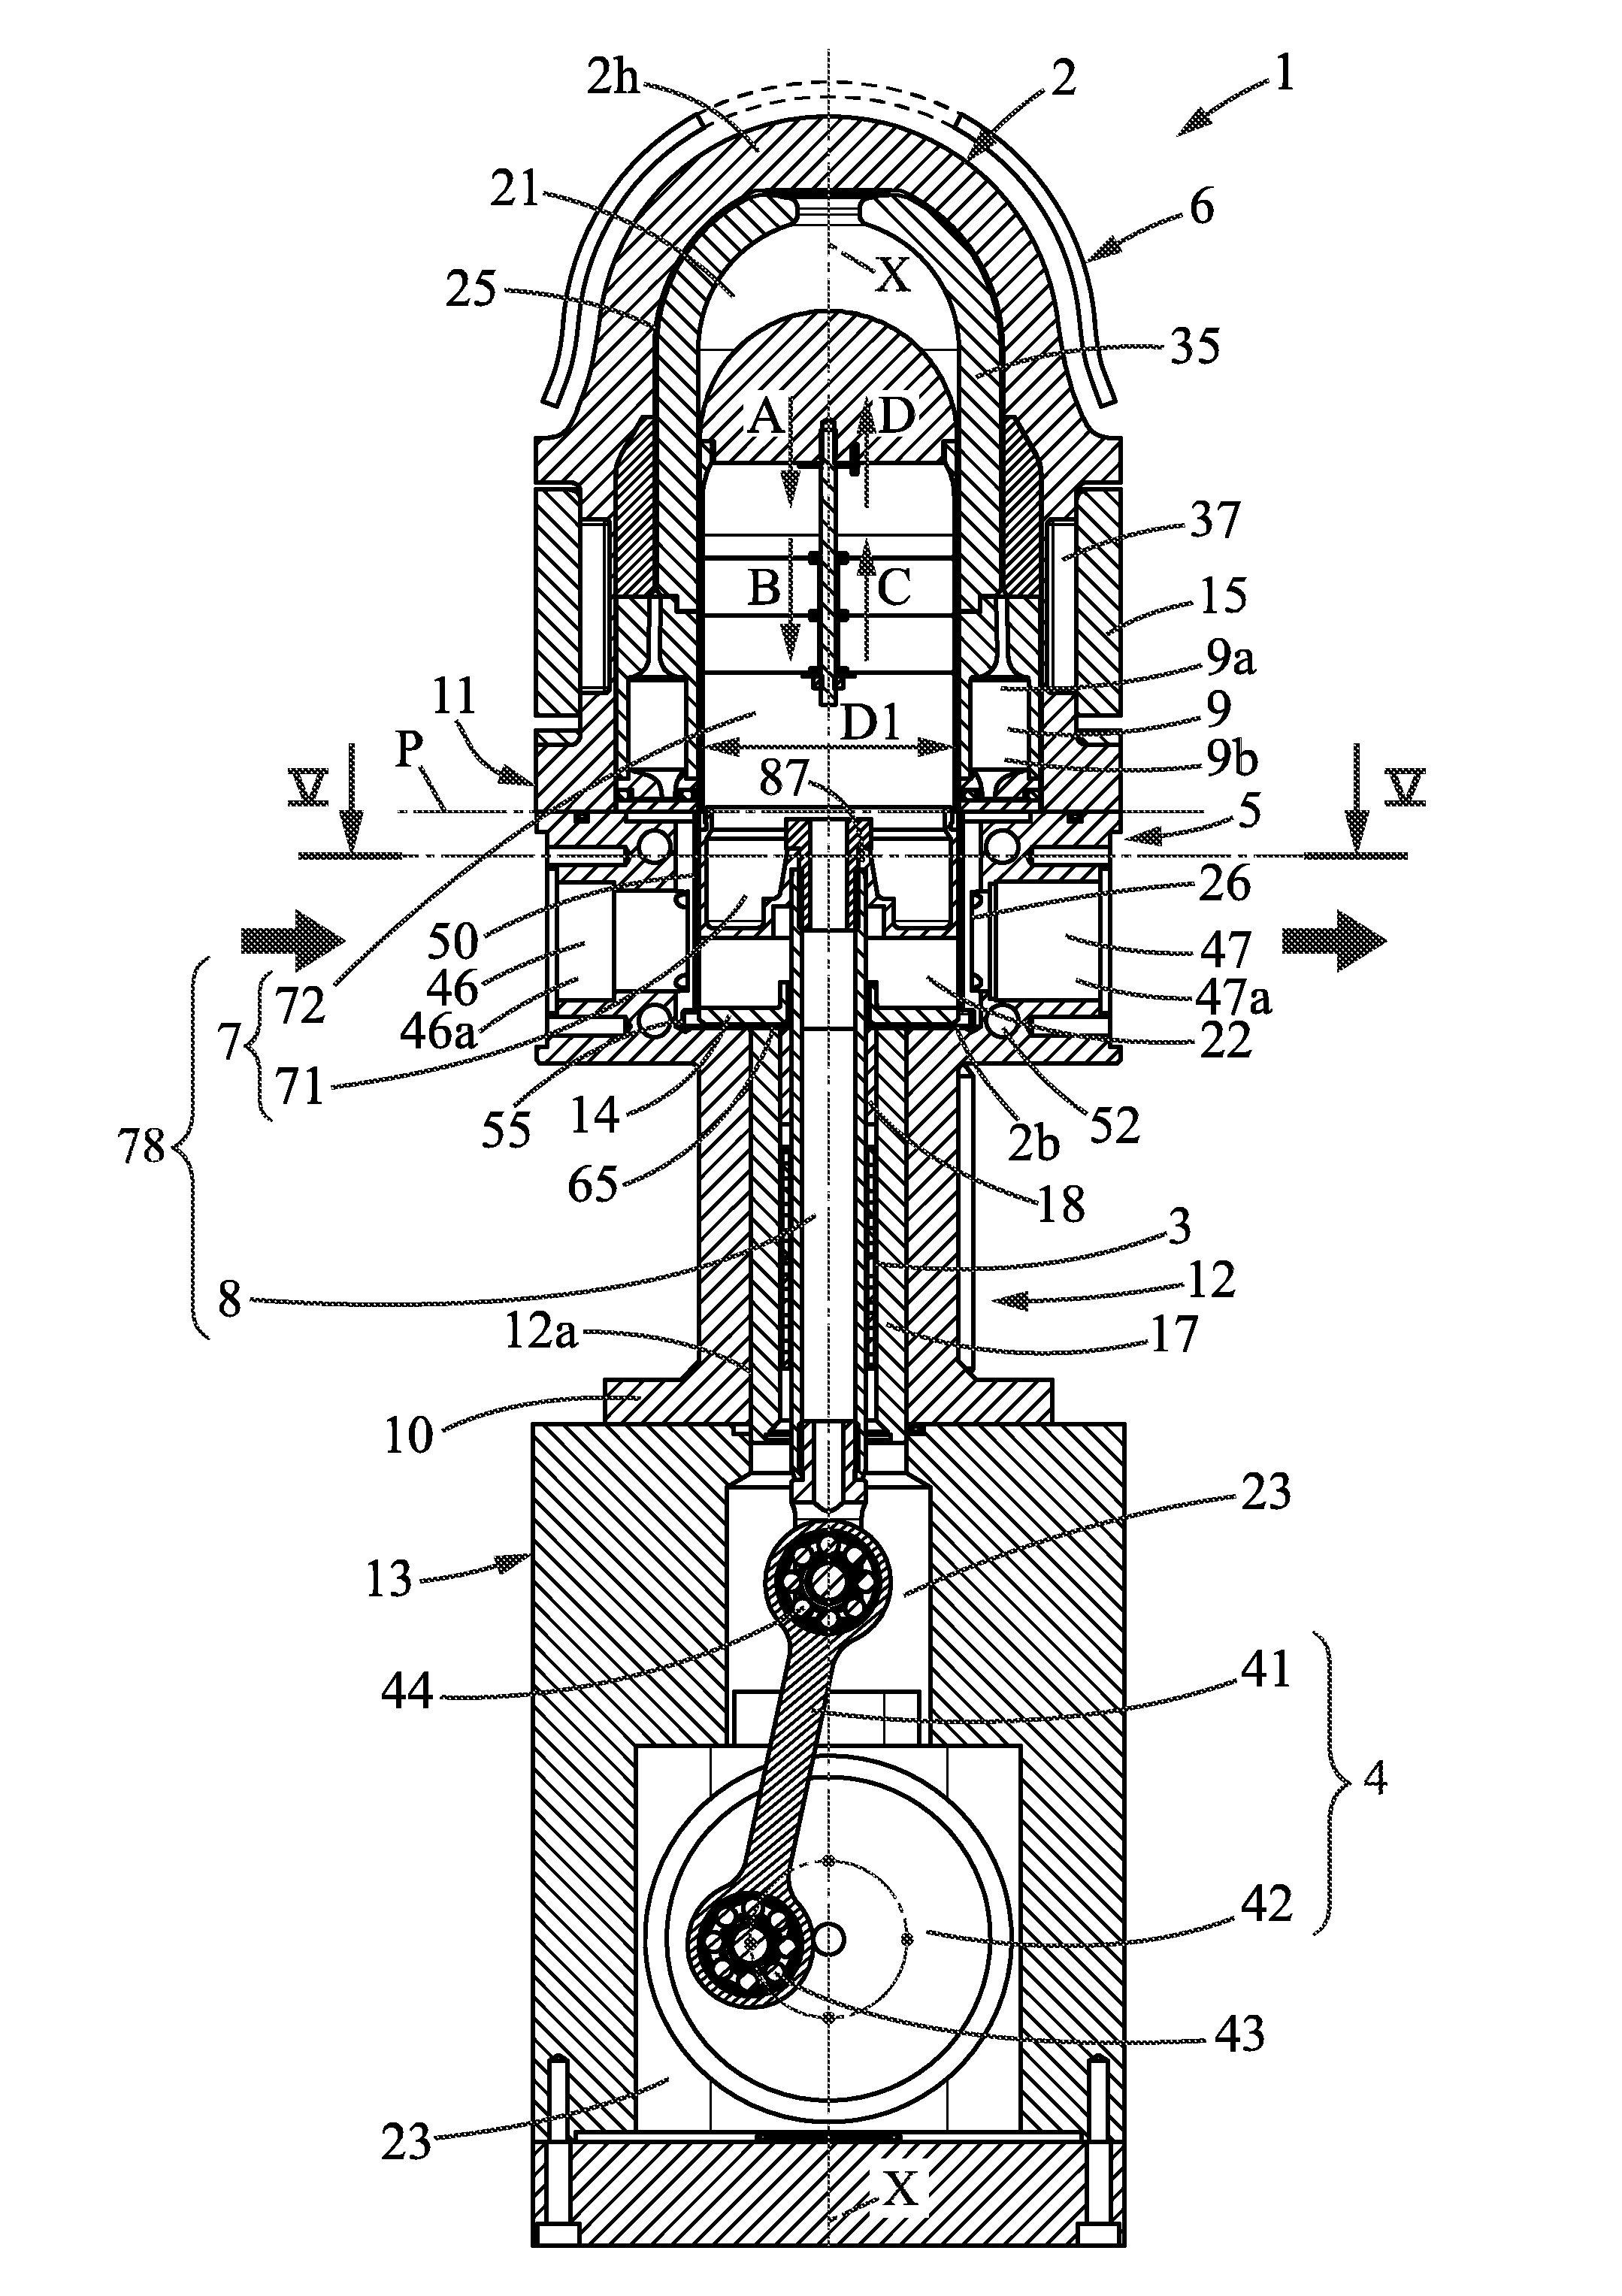 Device for thermal compression of a gaseous fluid